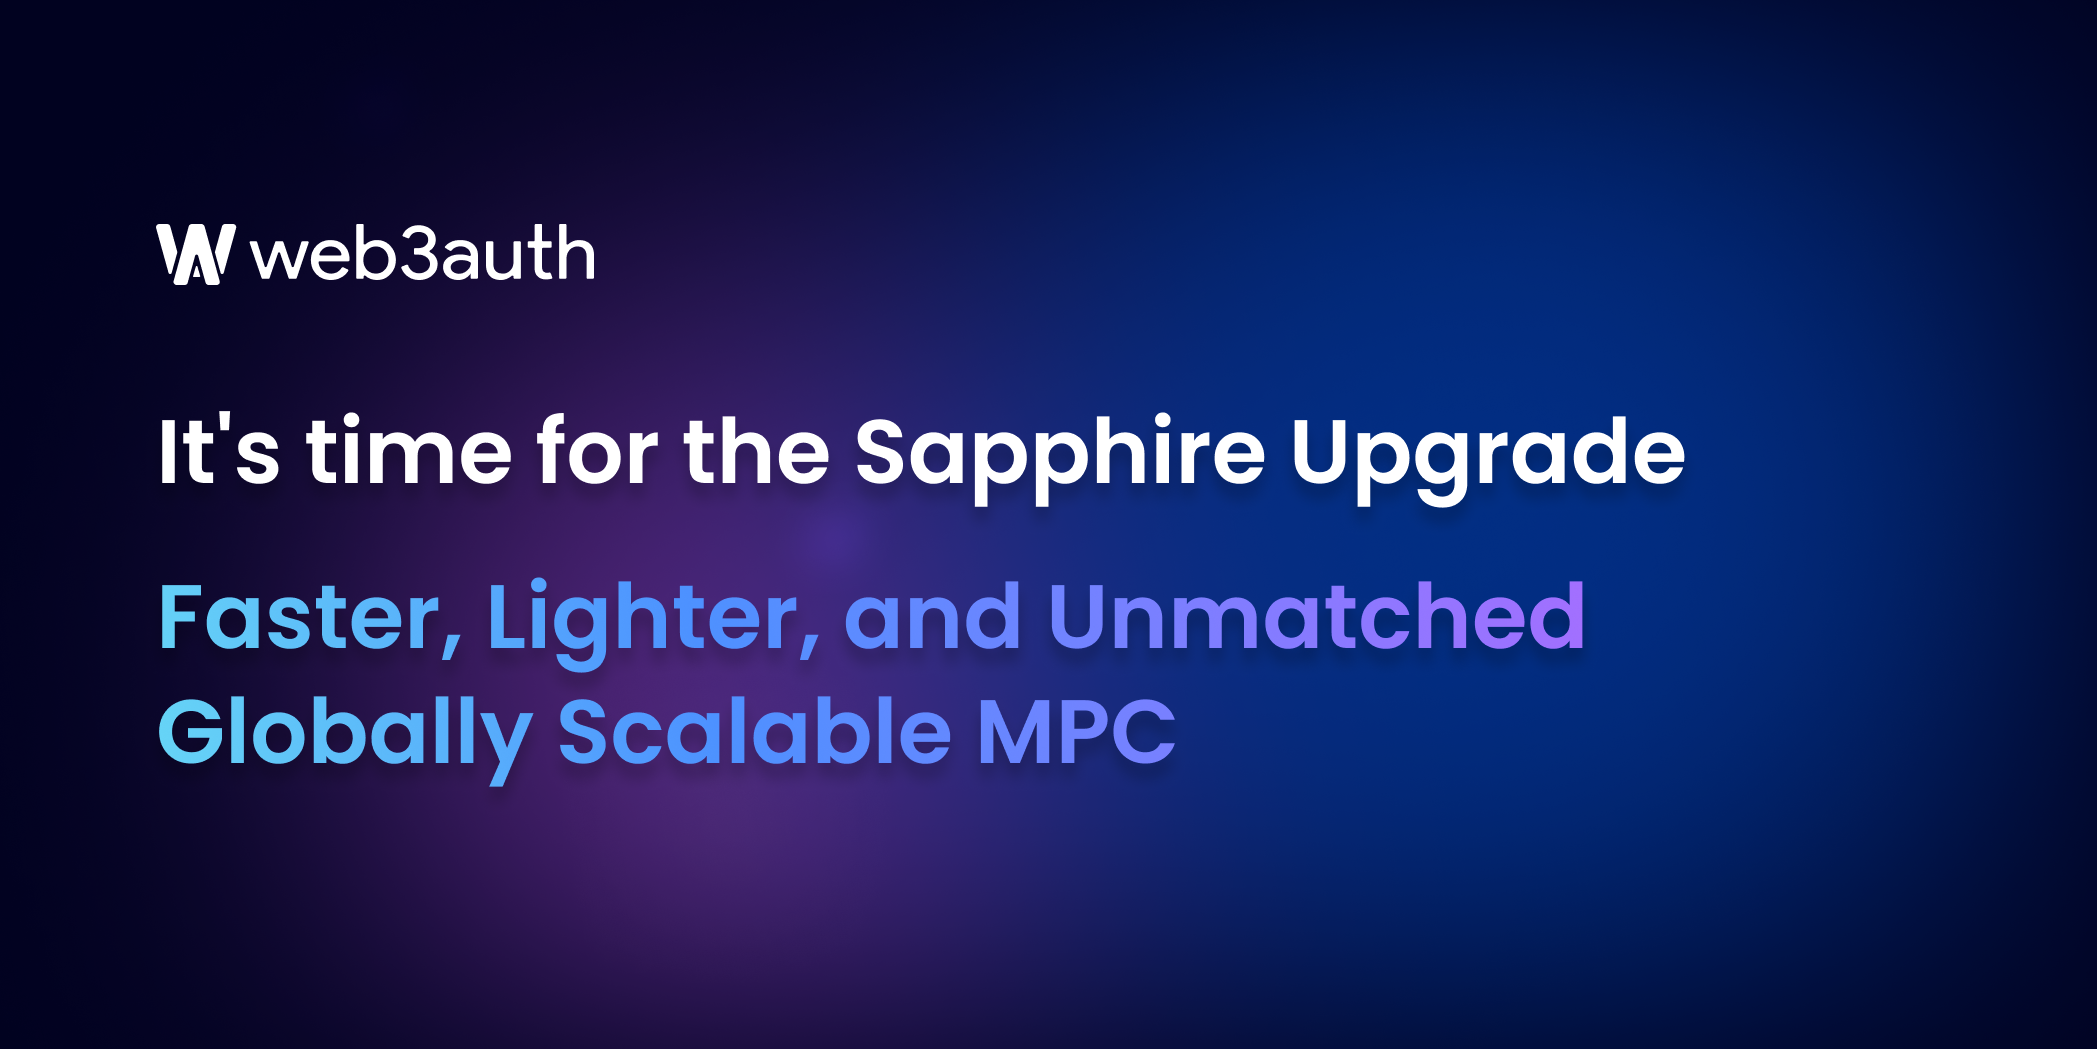 It's time for the Sapphire Upgrade - Faster, Lighter, and Unmatched Globally Scalable MPC